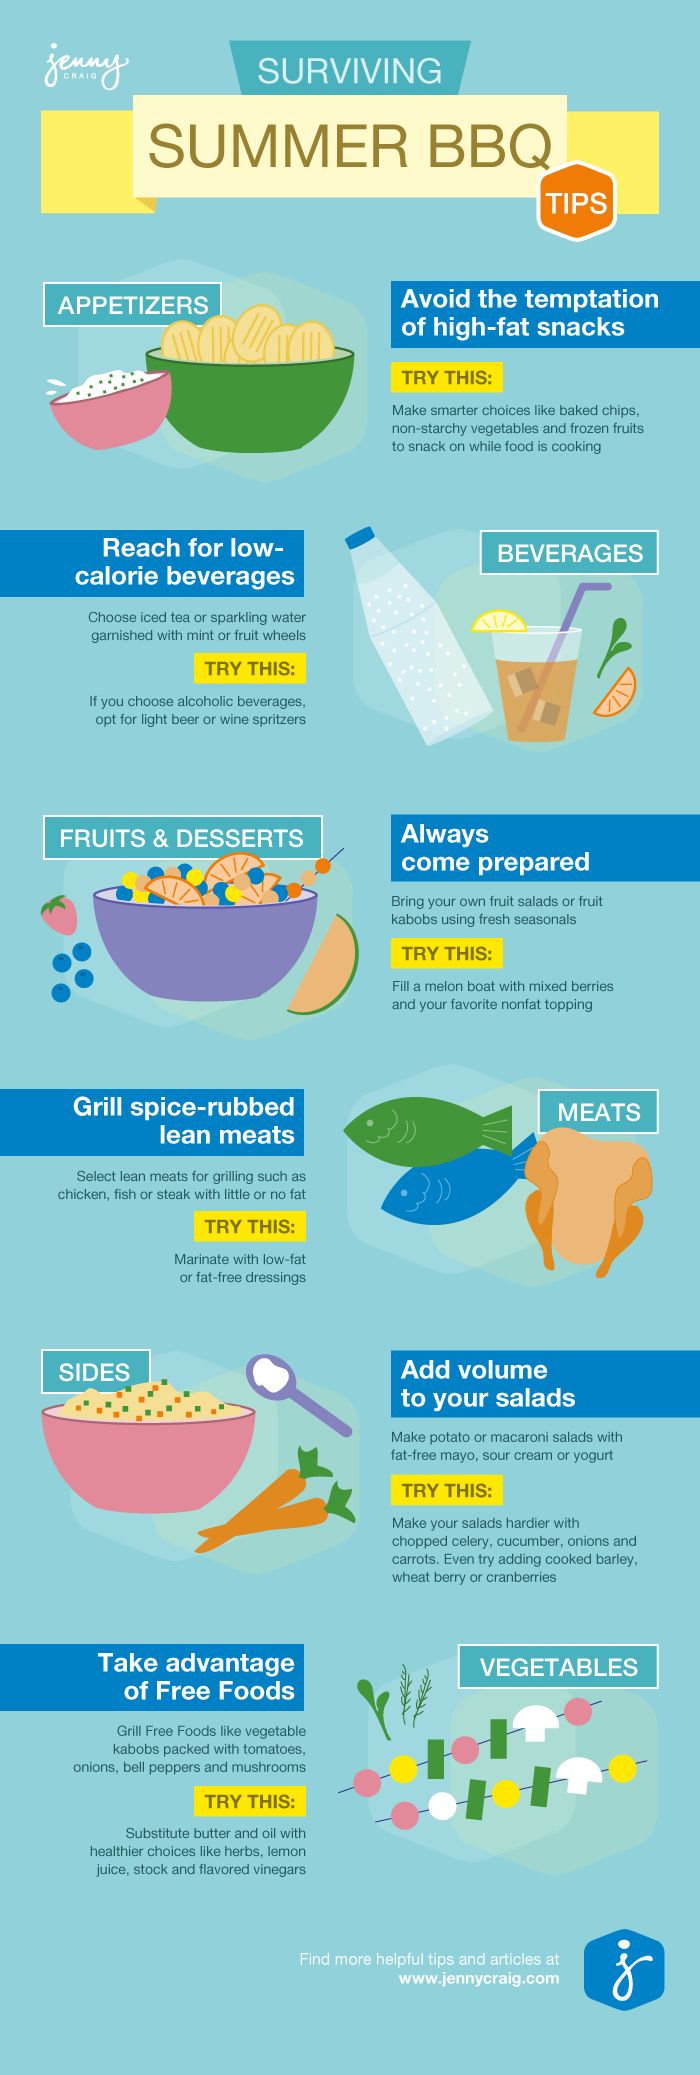 Surviving Summer BBQ: Useful Tips And Tricks Infographic